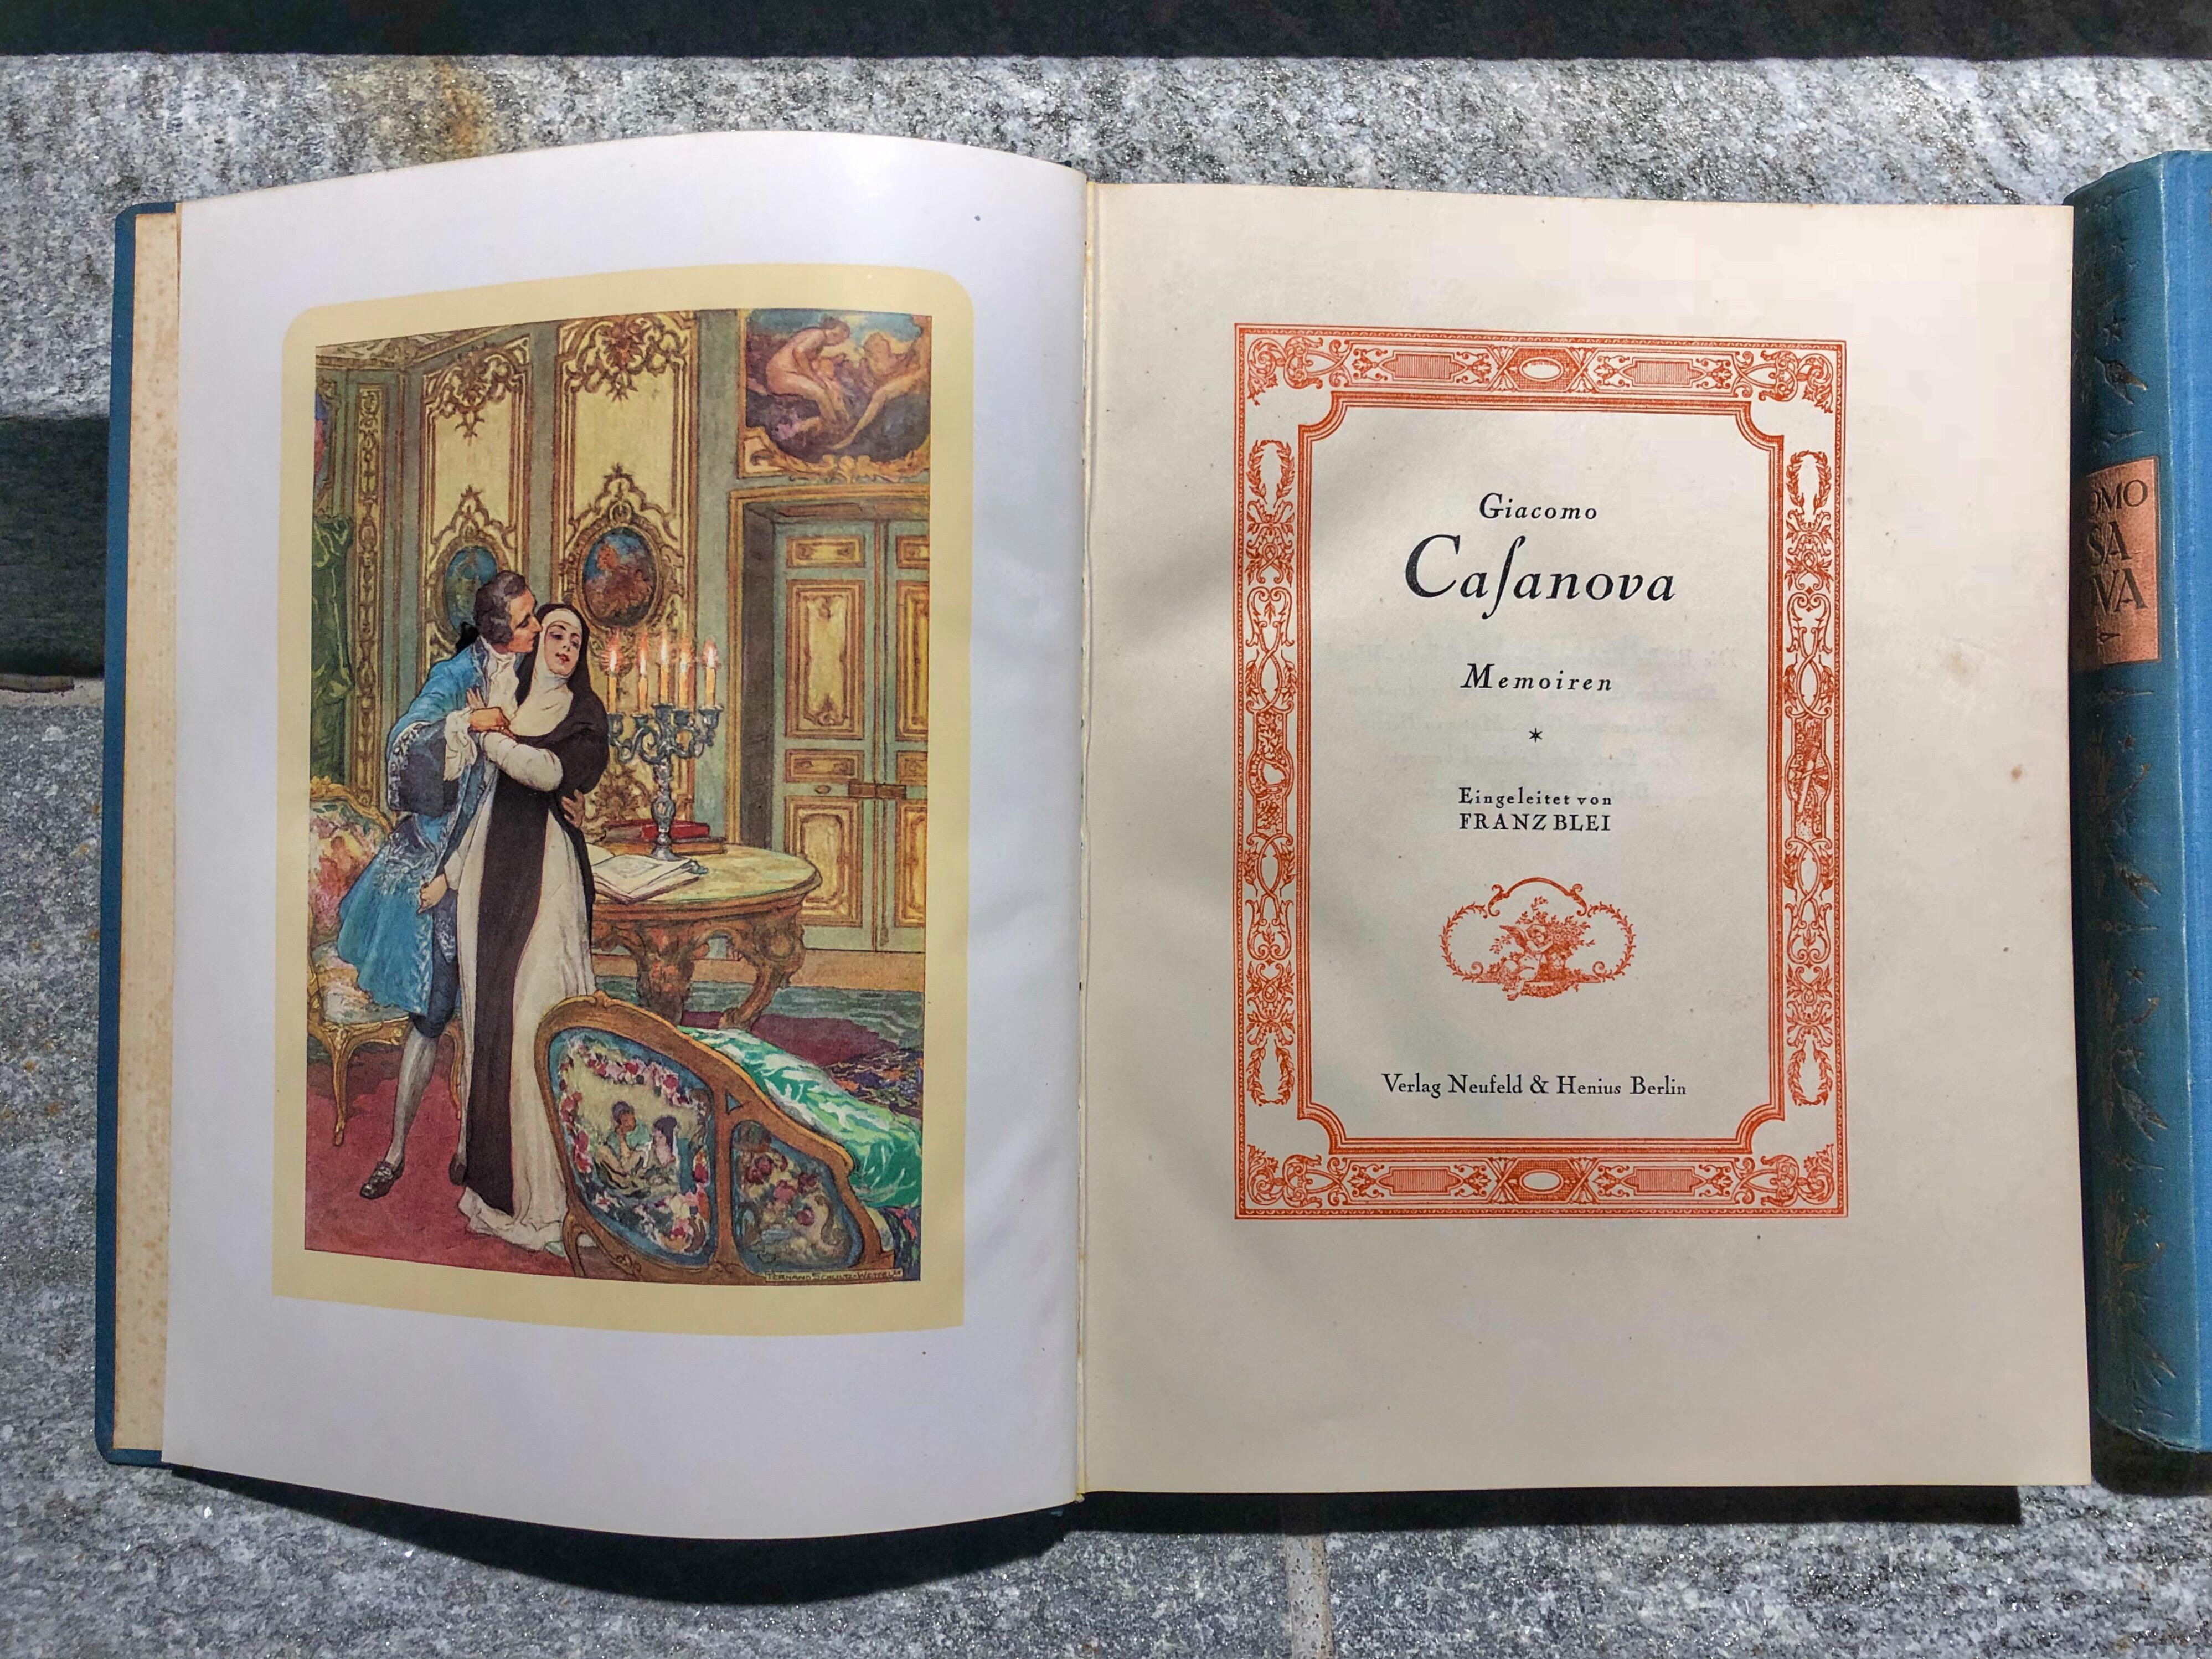 Original blue decorated cloth. Very nice edition of these memories of Casanova. Illustrated by Ferdinand Schultz-Wettel.







